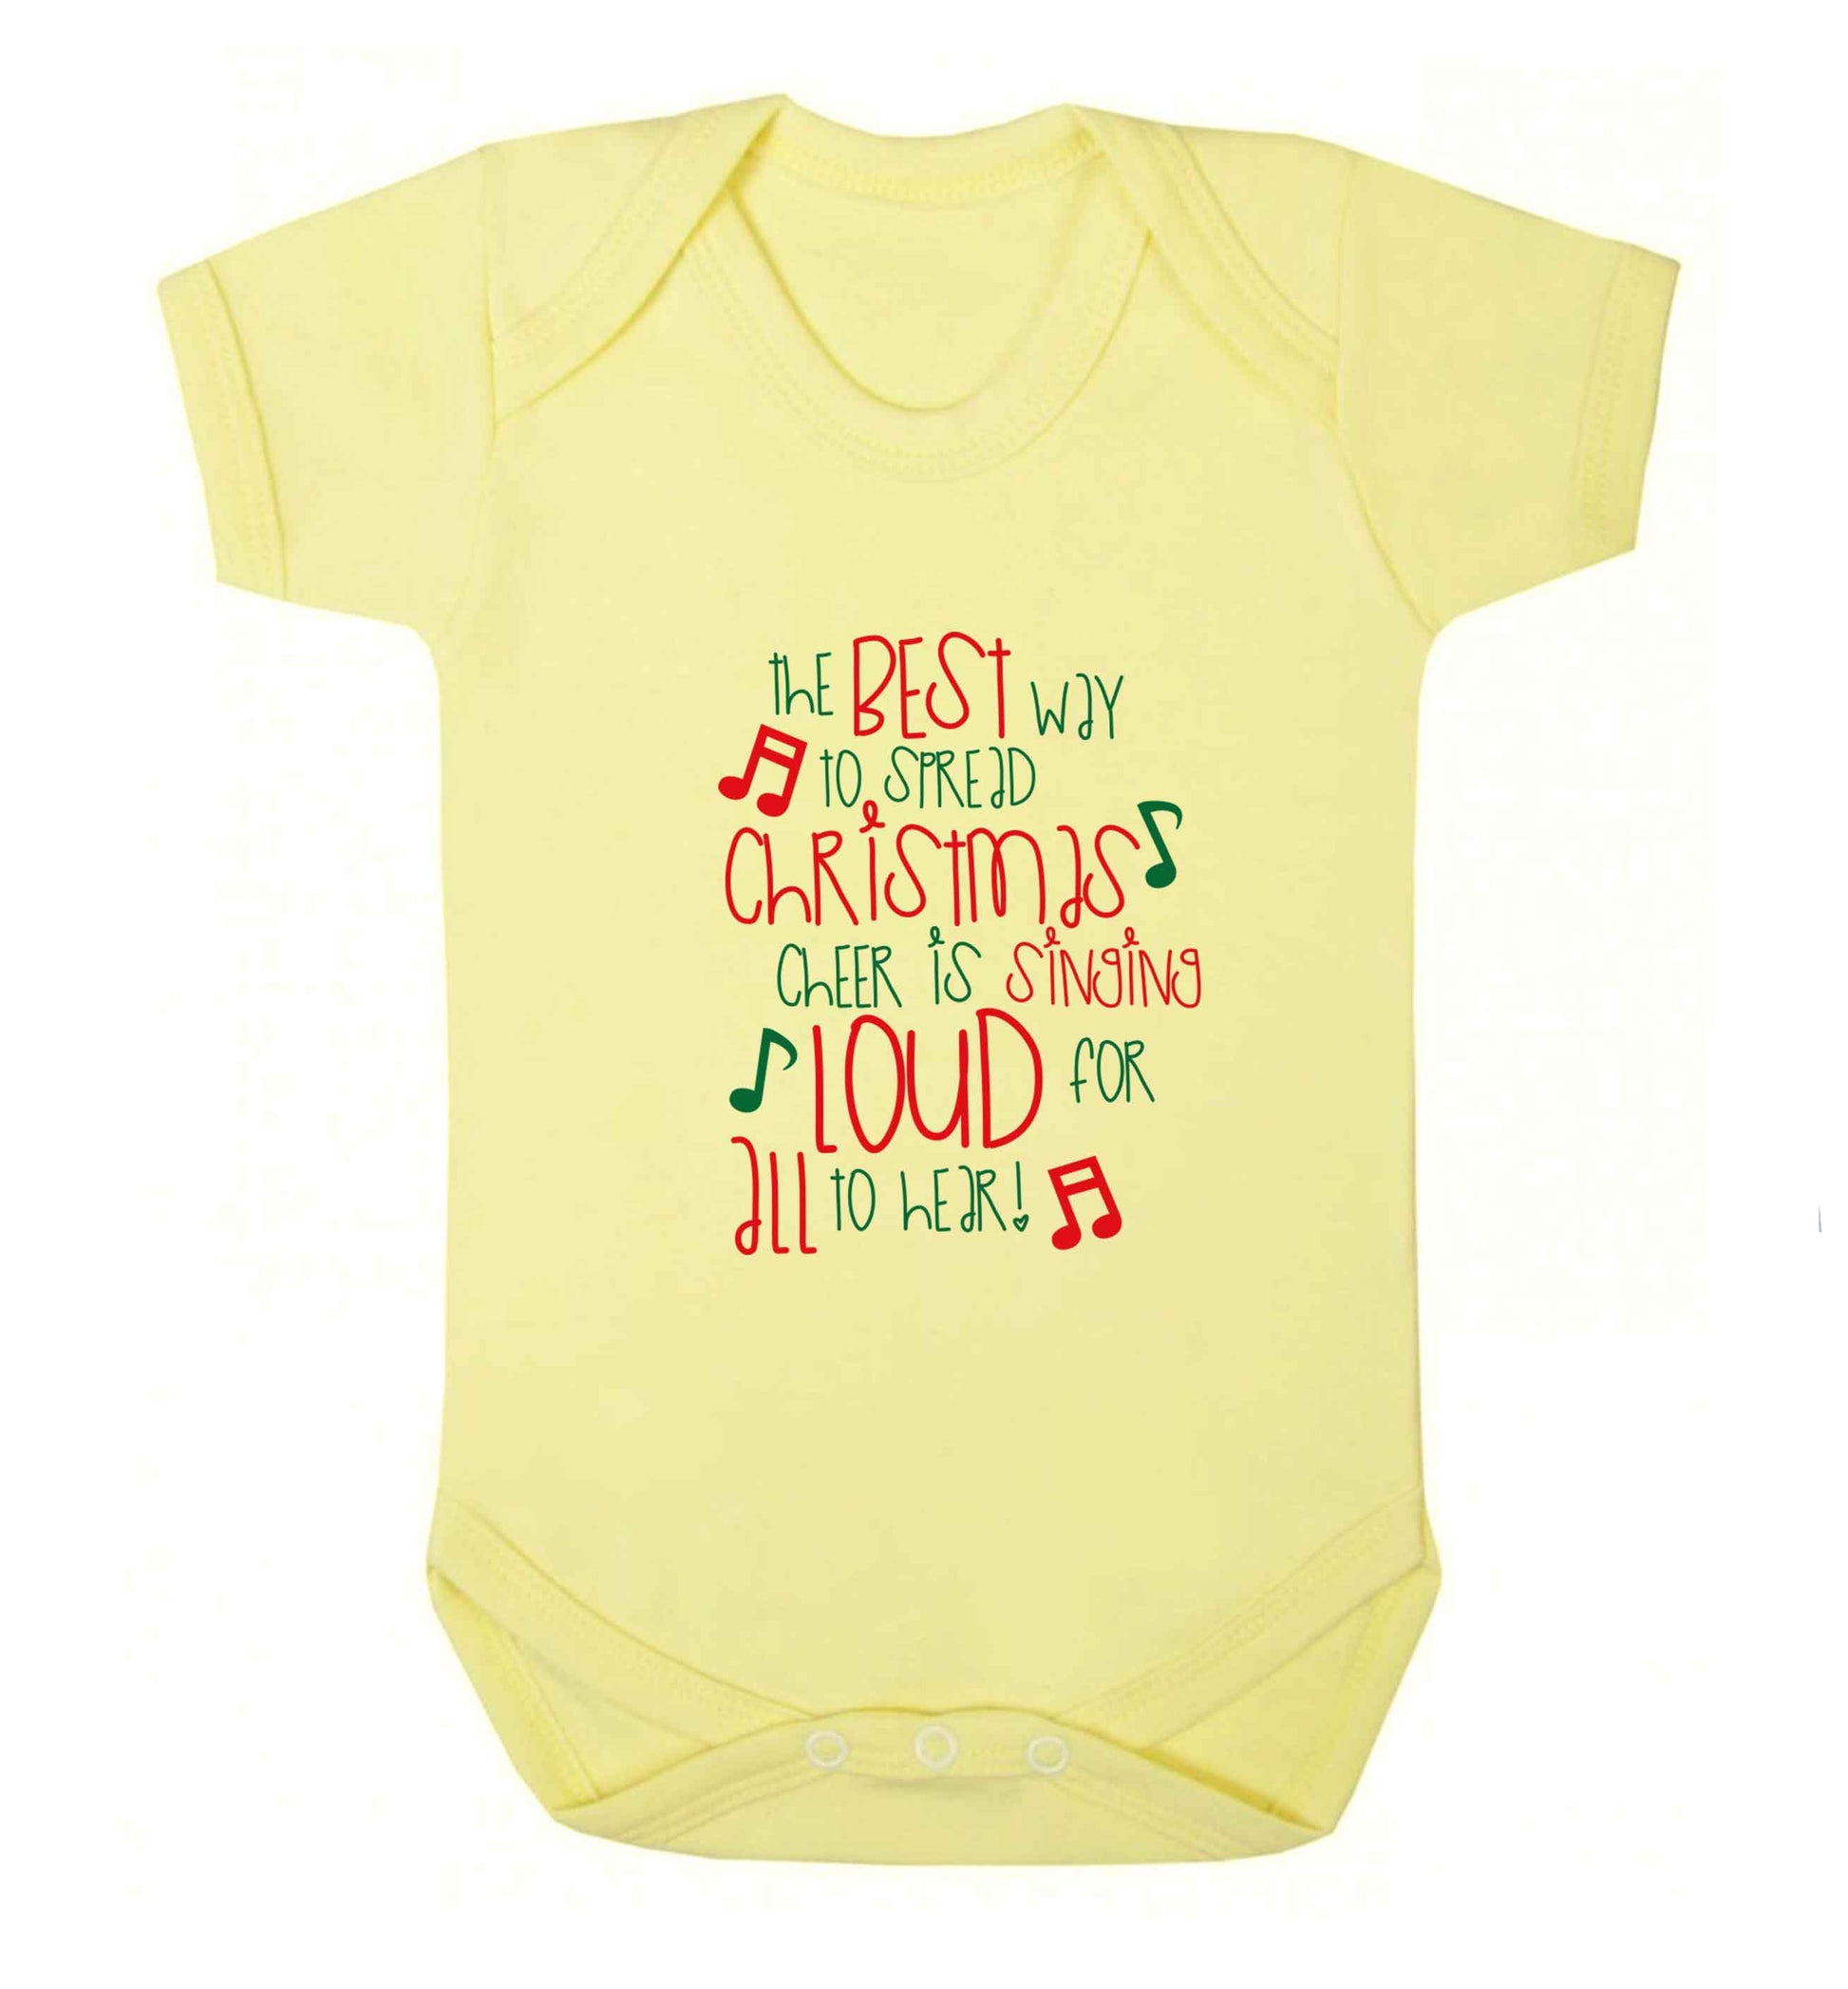 The best way to spread Christmas cheer is singing loud for all to hear baby vest pale yellow 18-24 months